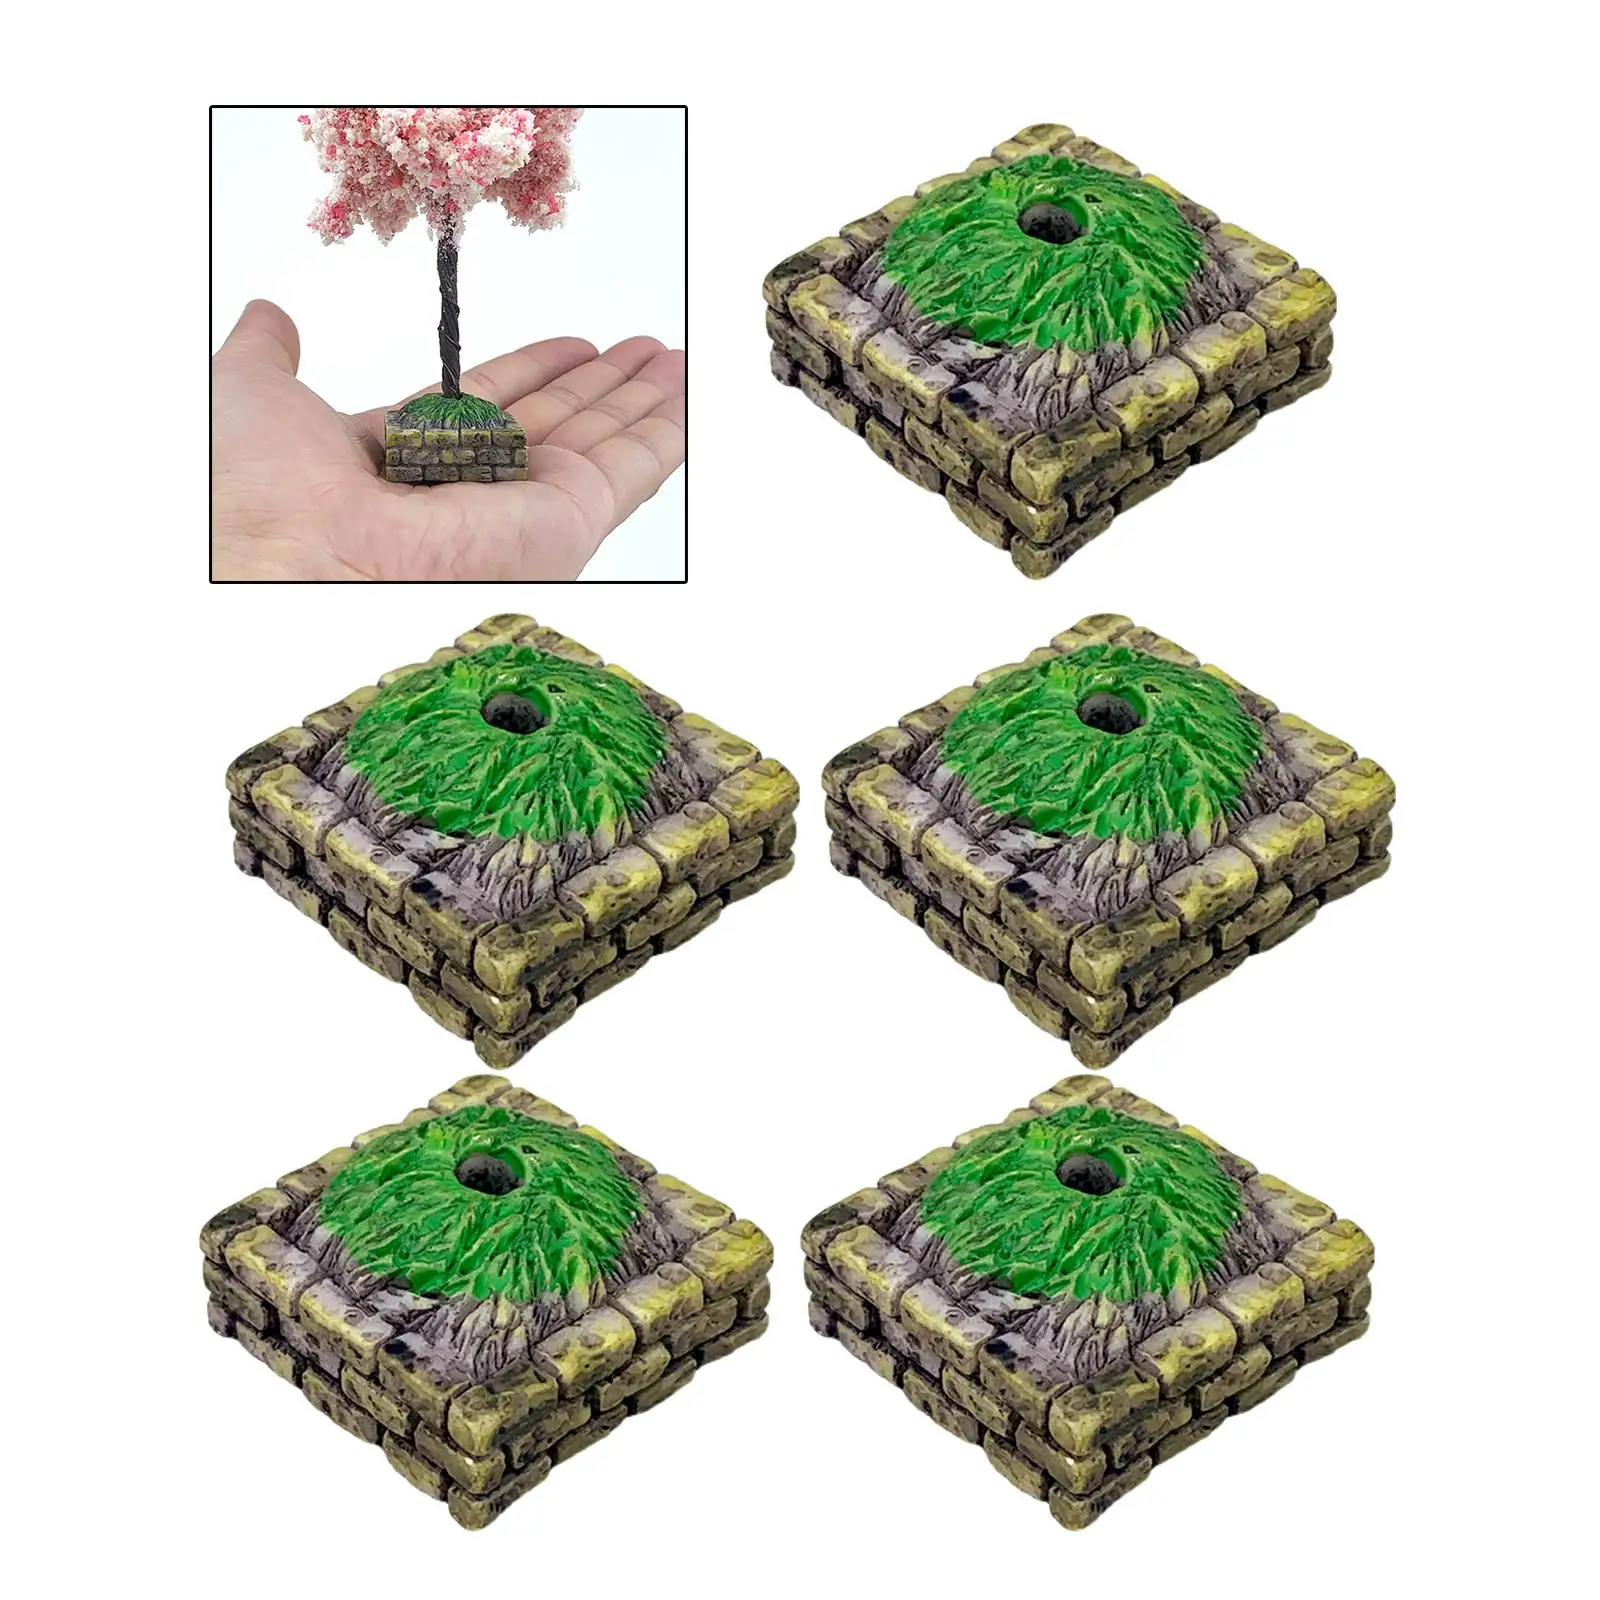 5 Pieces Figurines DIY Accs Decoration Gifts for Street Building Sand Table